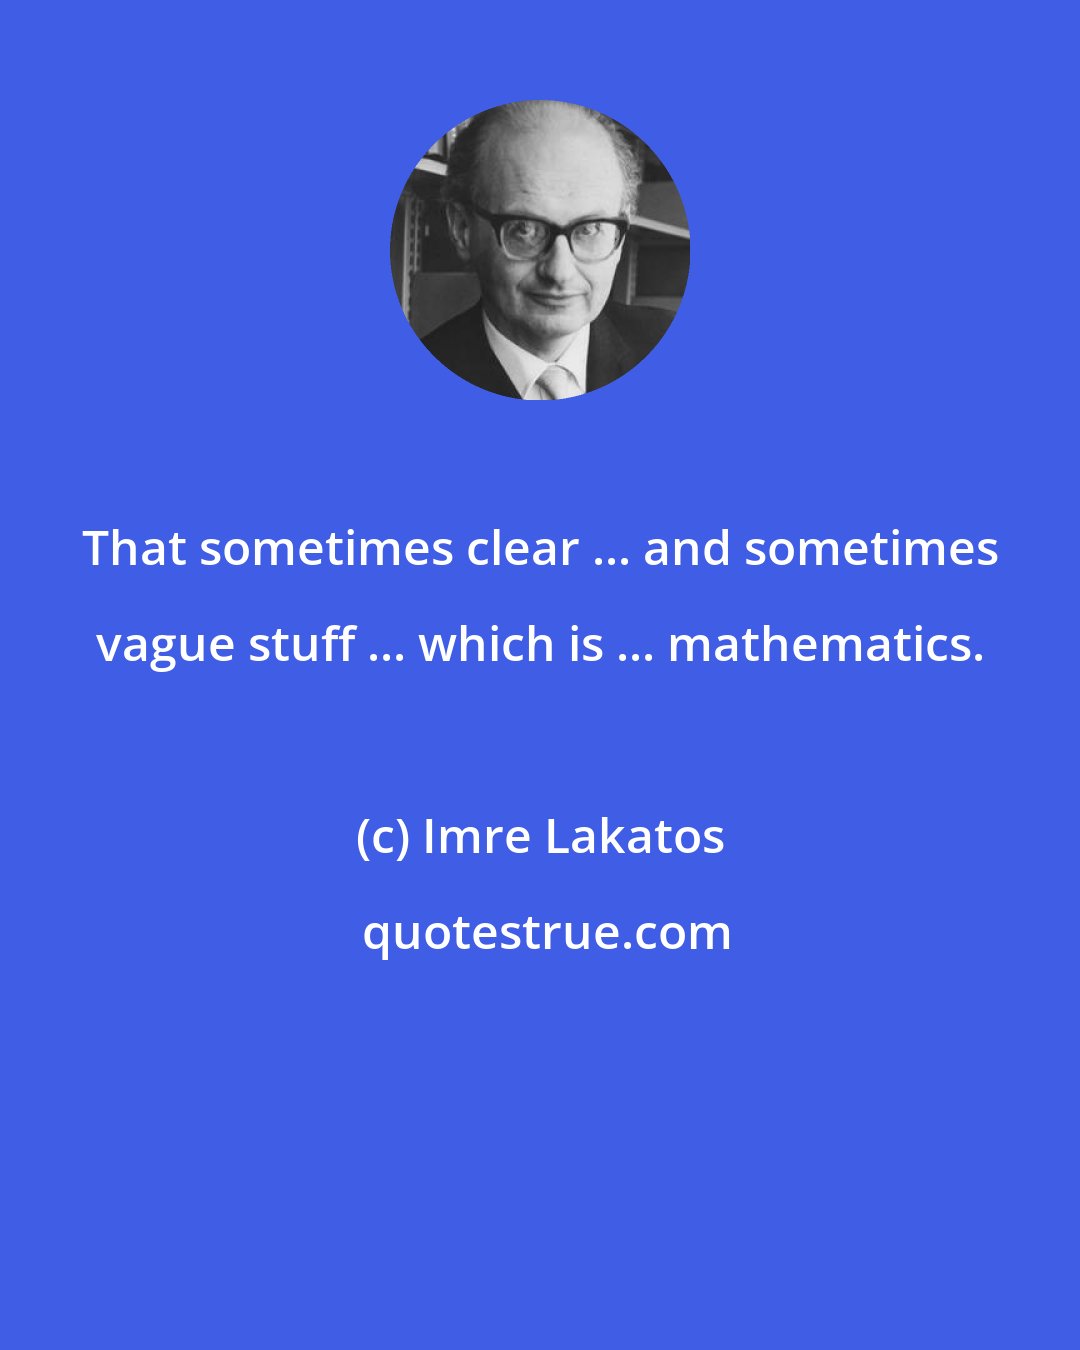 Imre Lakatos: That sometimes clear ... and sometimes vague stuff ... which is ... mathematics.